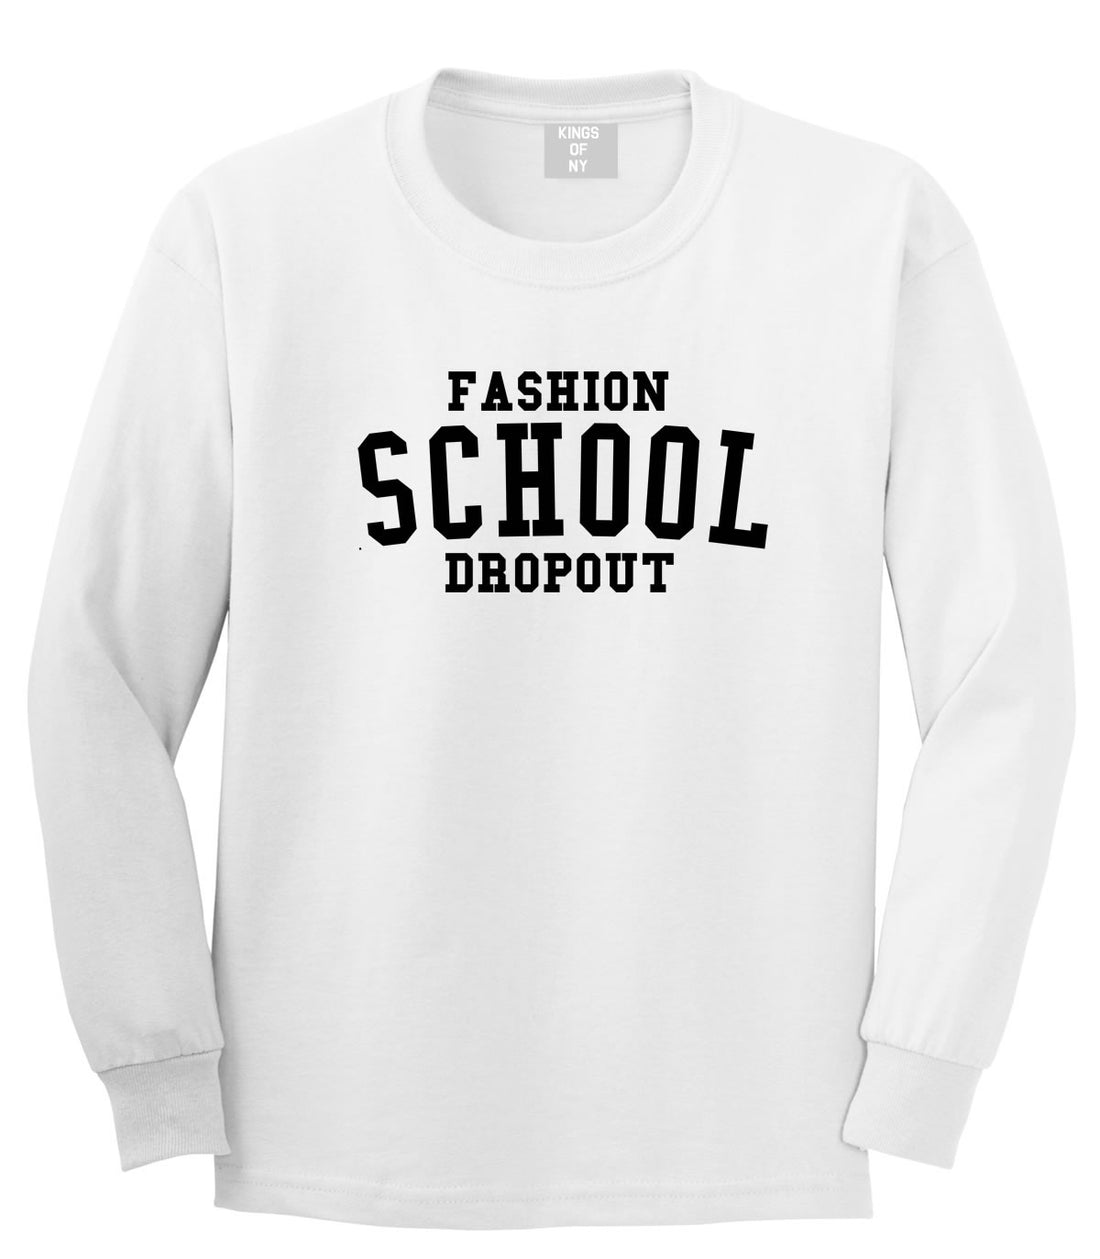 Fashion School Dropout Blogger Long Sleeve T-Shirt in White By Kings Of NY